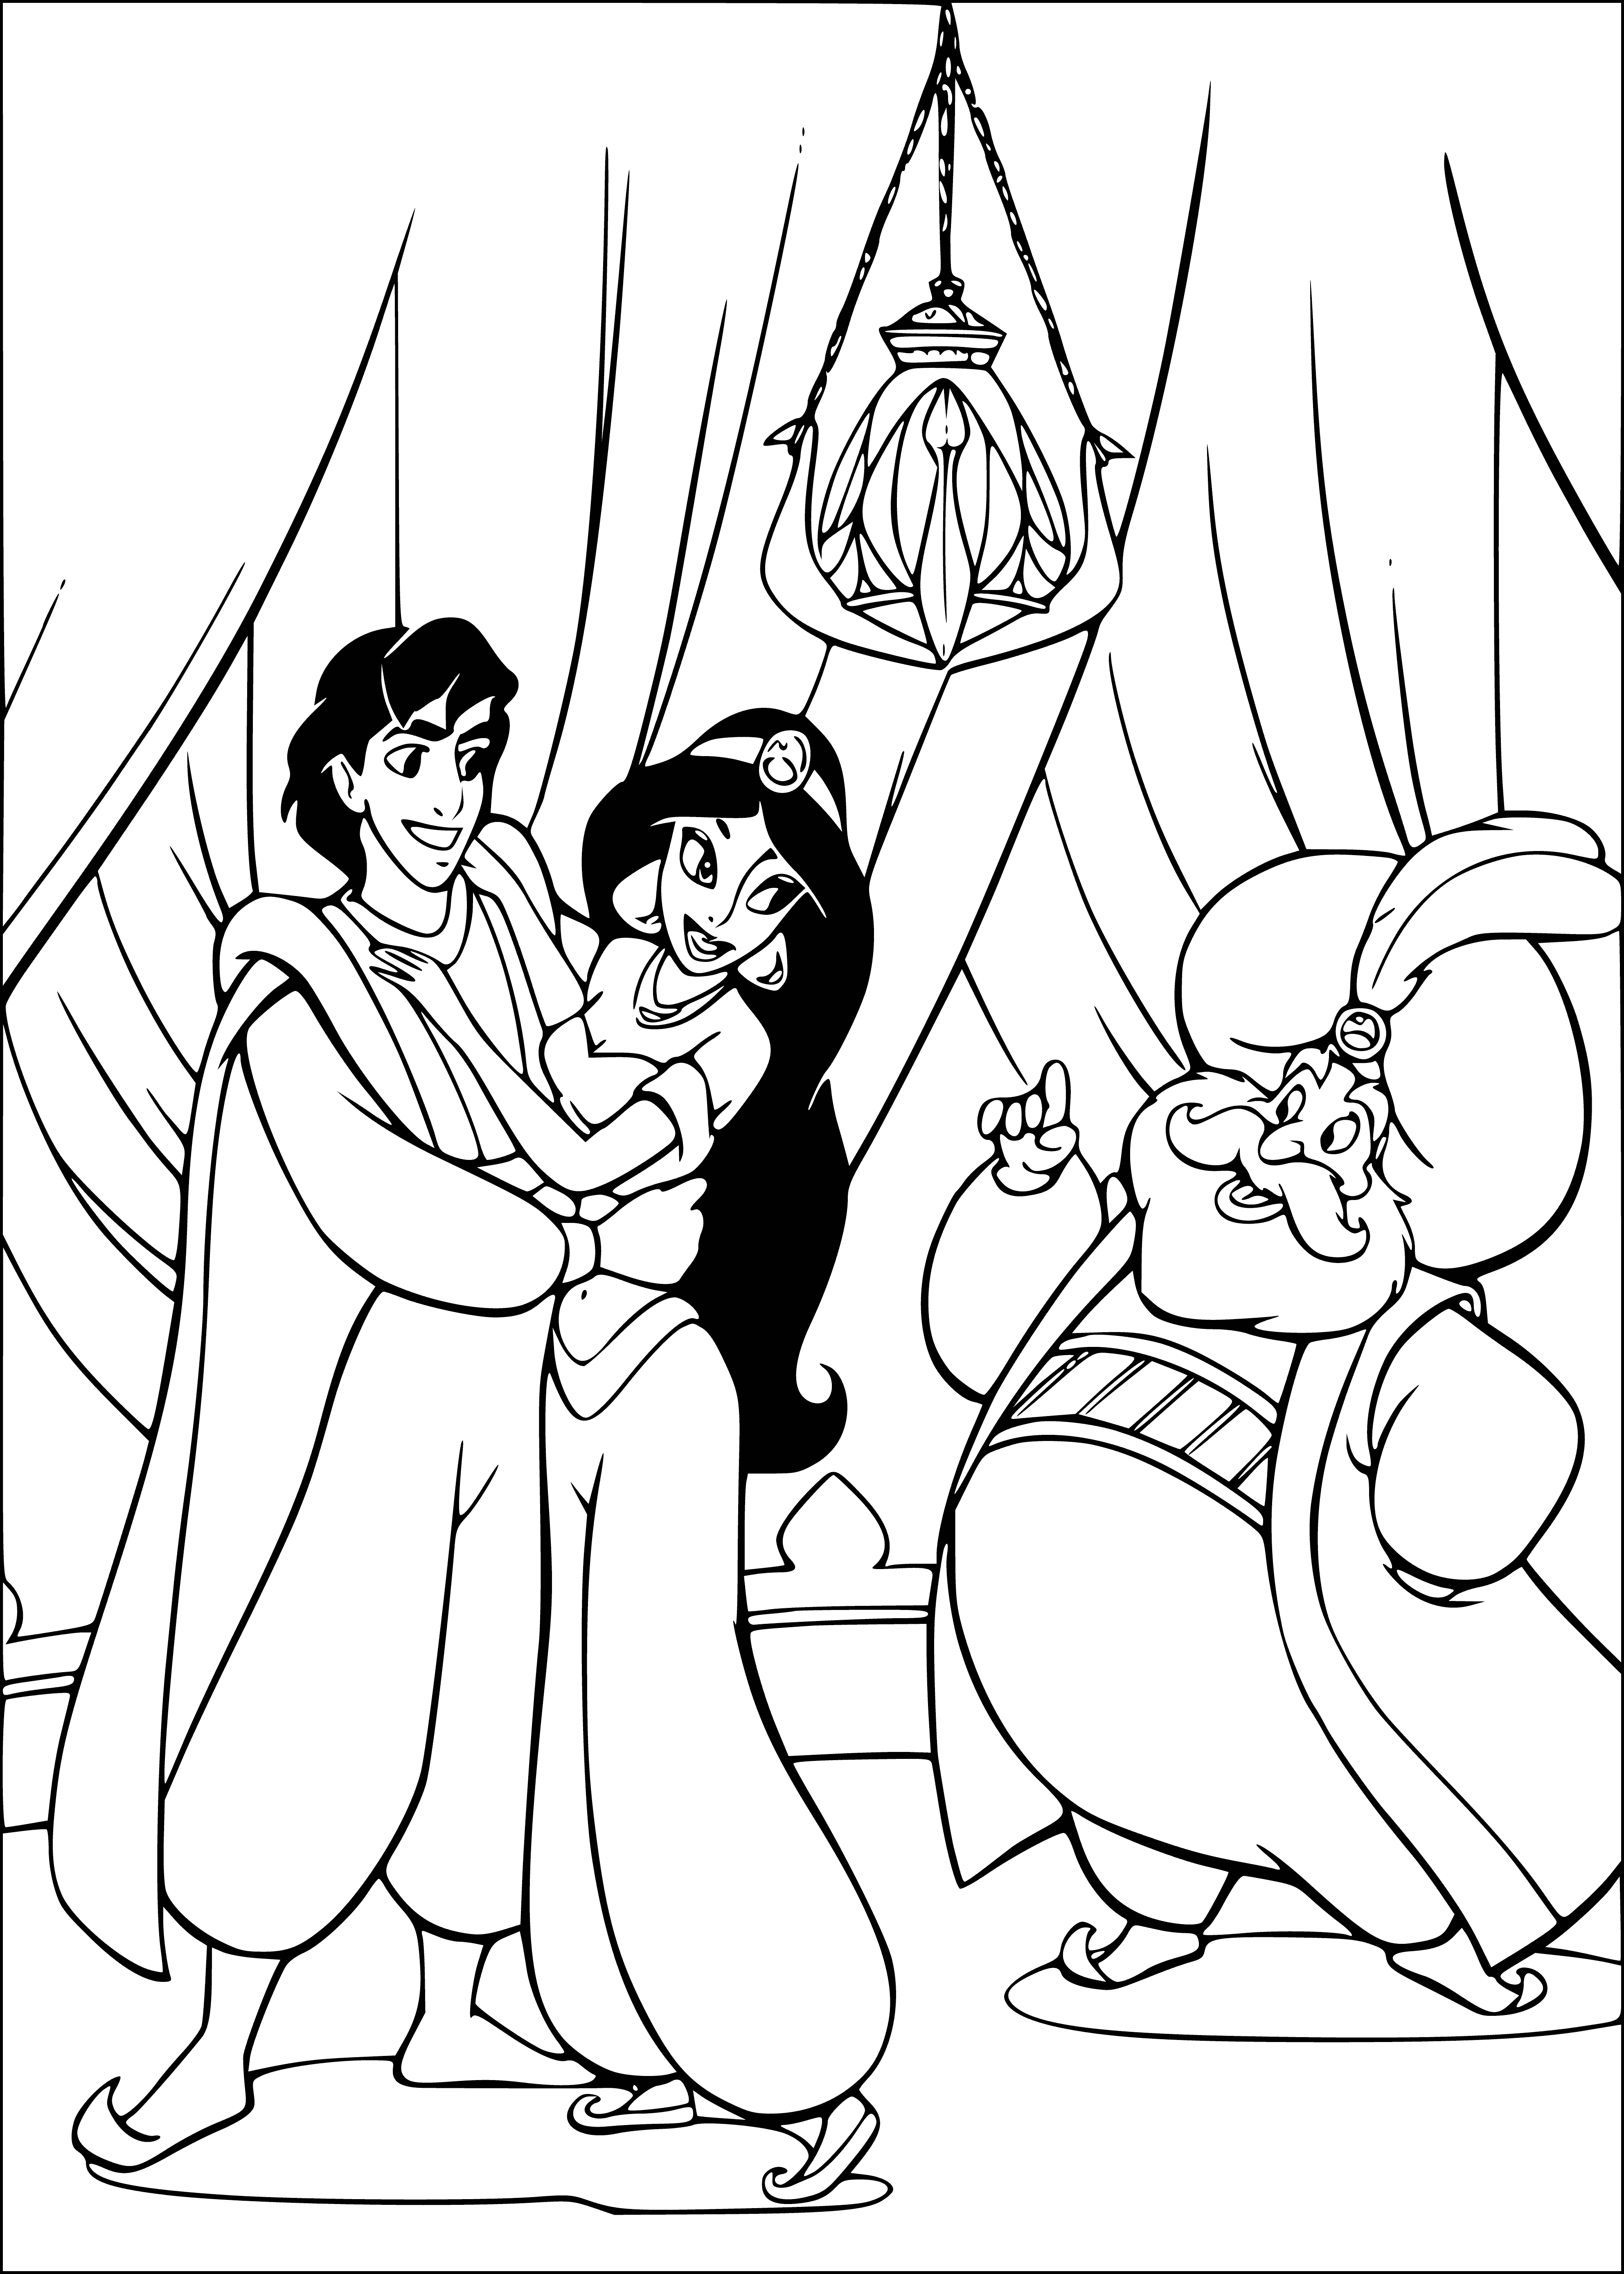 Jasmine and Aladdin coloring page